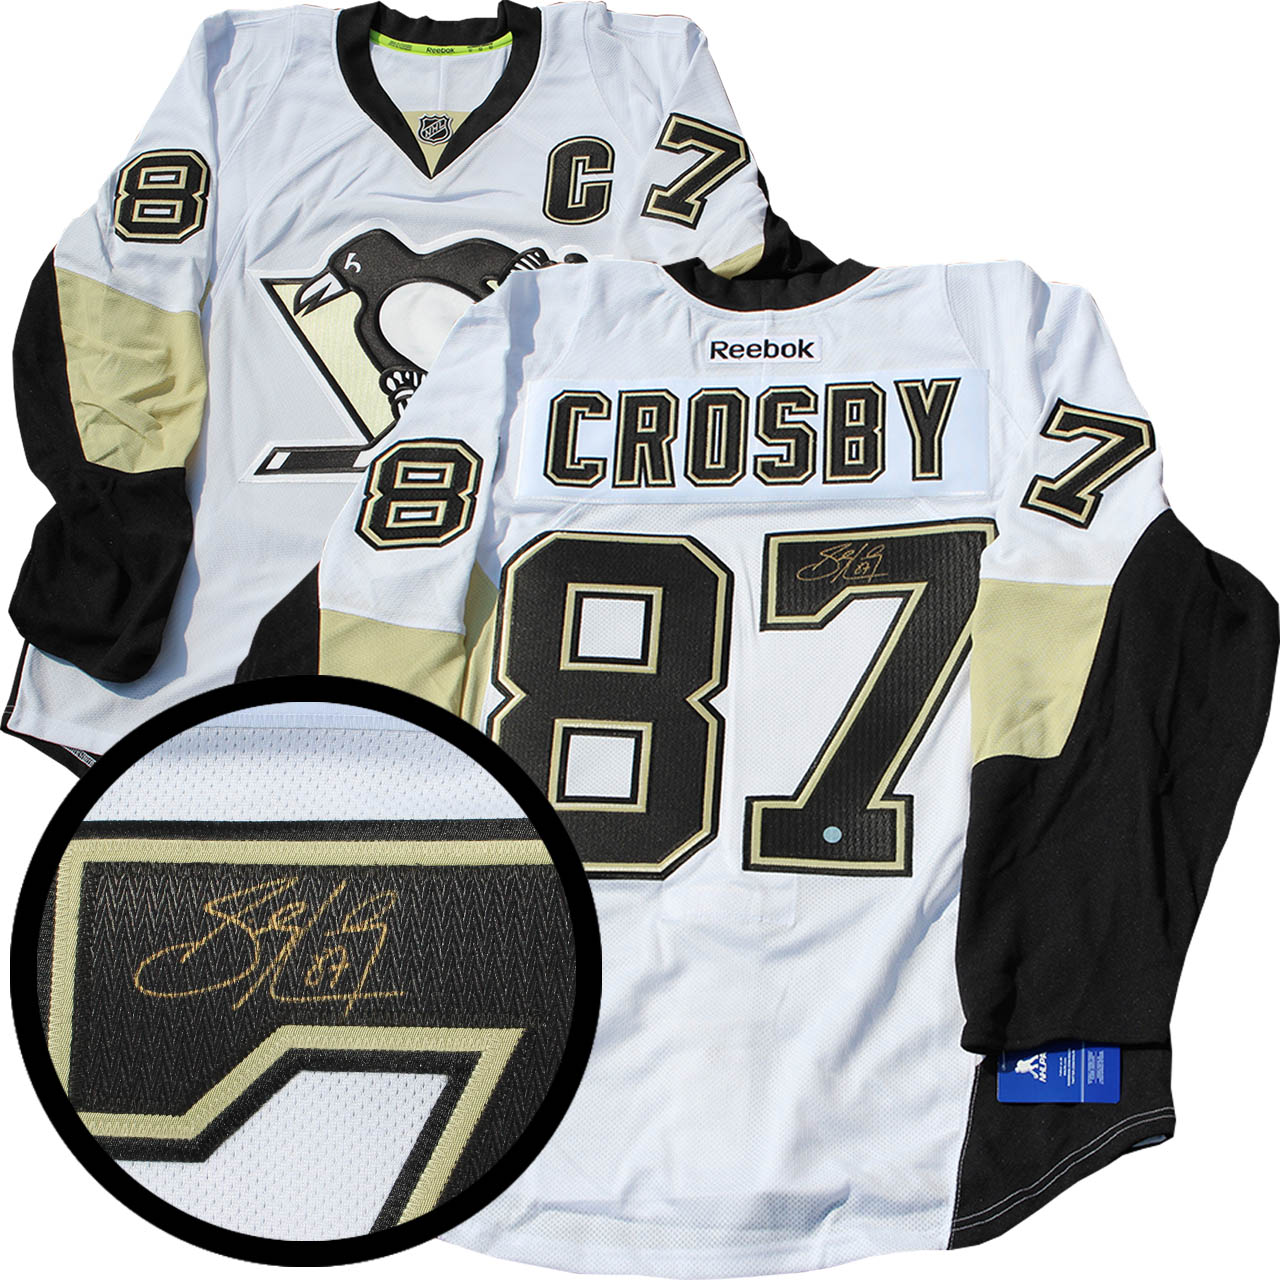 crosby autographed jersey